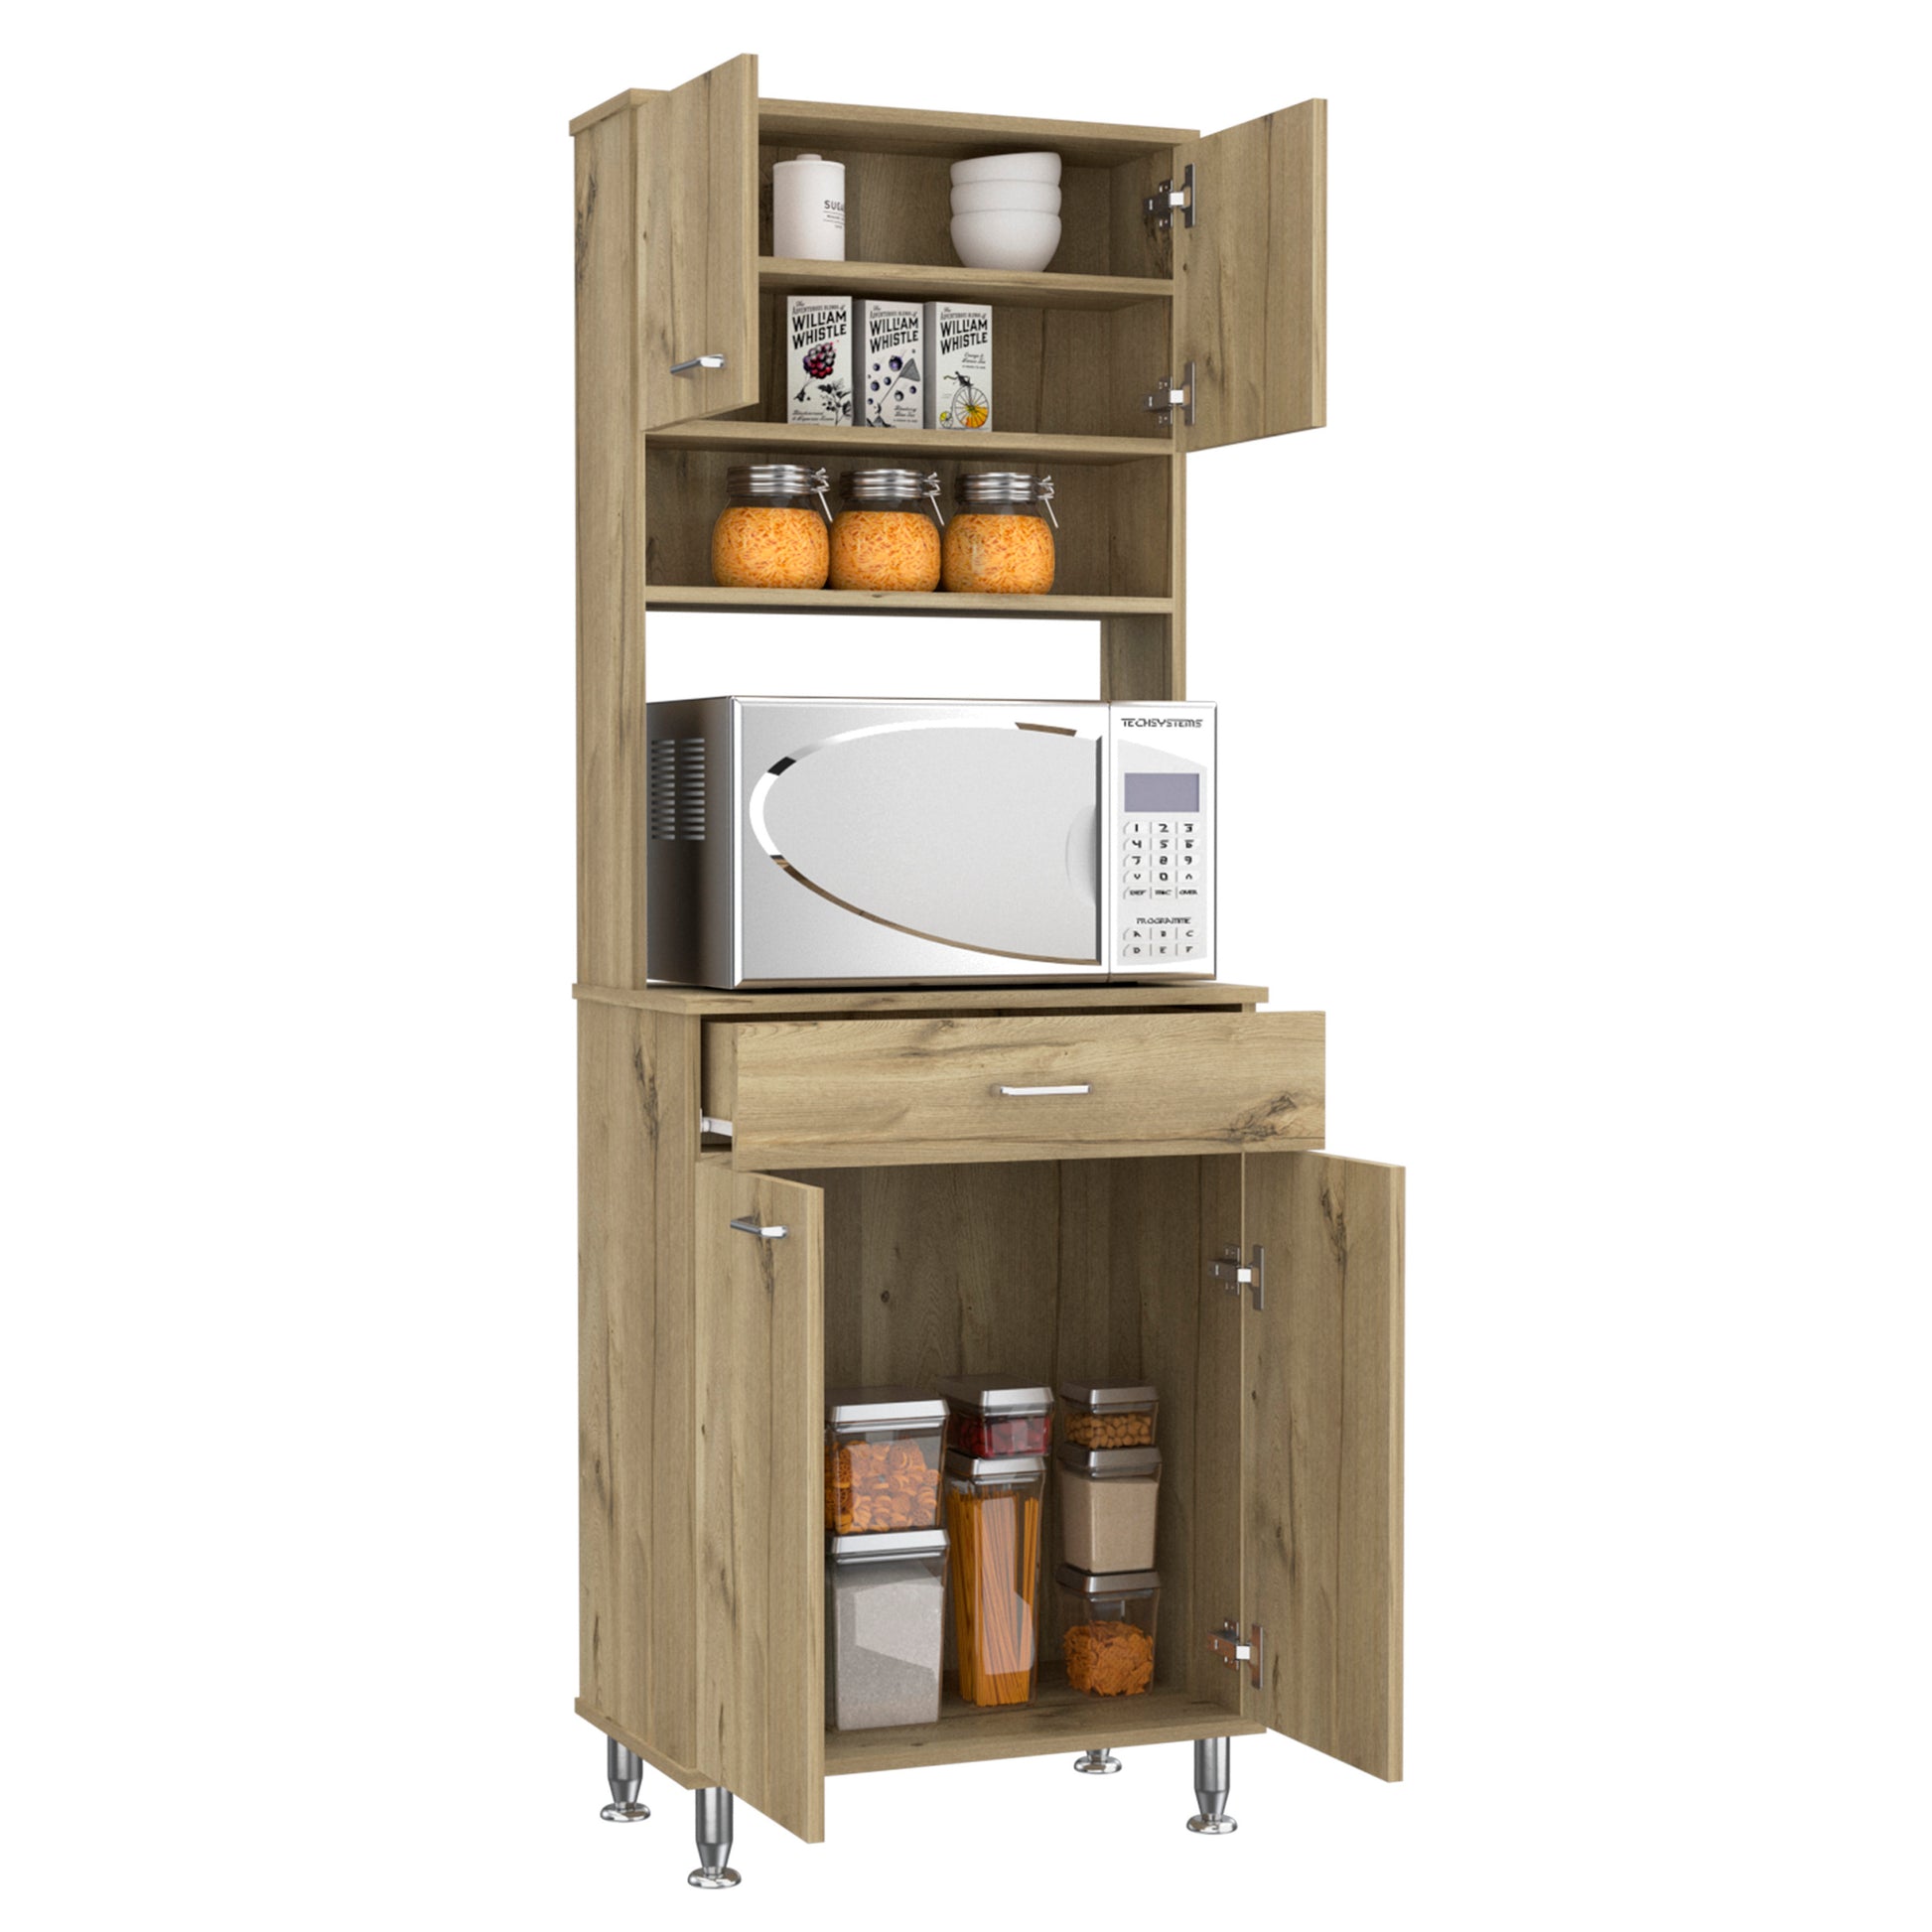 DEPOT E SHOP Helis 60 Pantry Double Door Cabinet, One beige-particle board-particle board